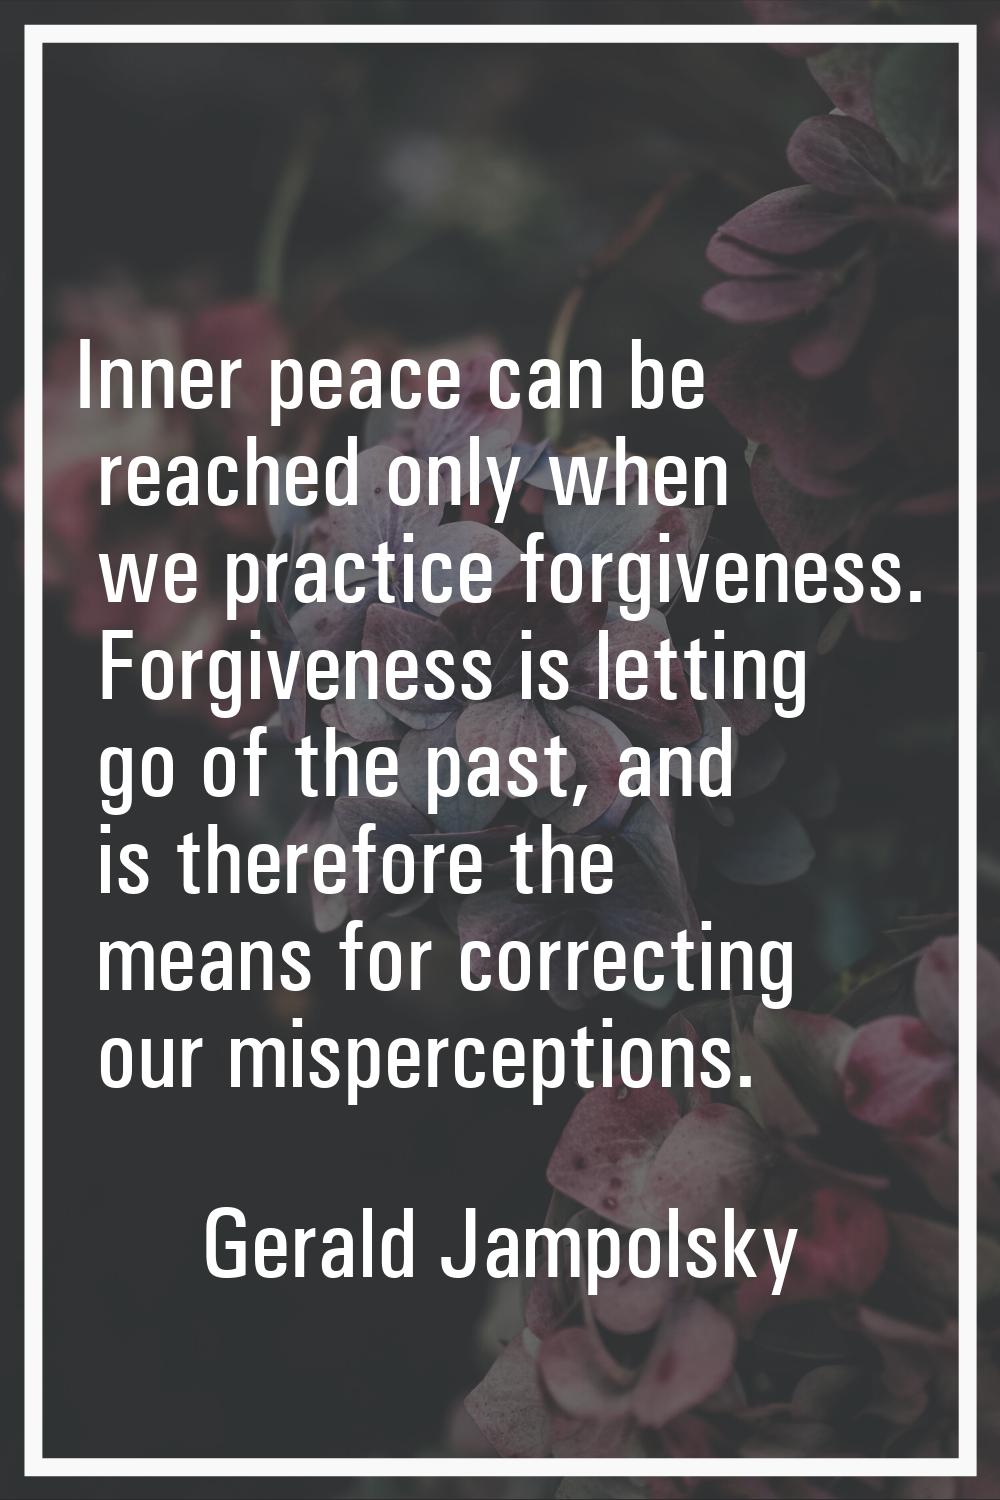 Inner peace can be reached only when we practice forgiveness. Forgiveness is letting go of the past